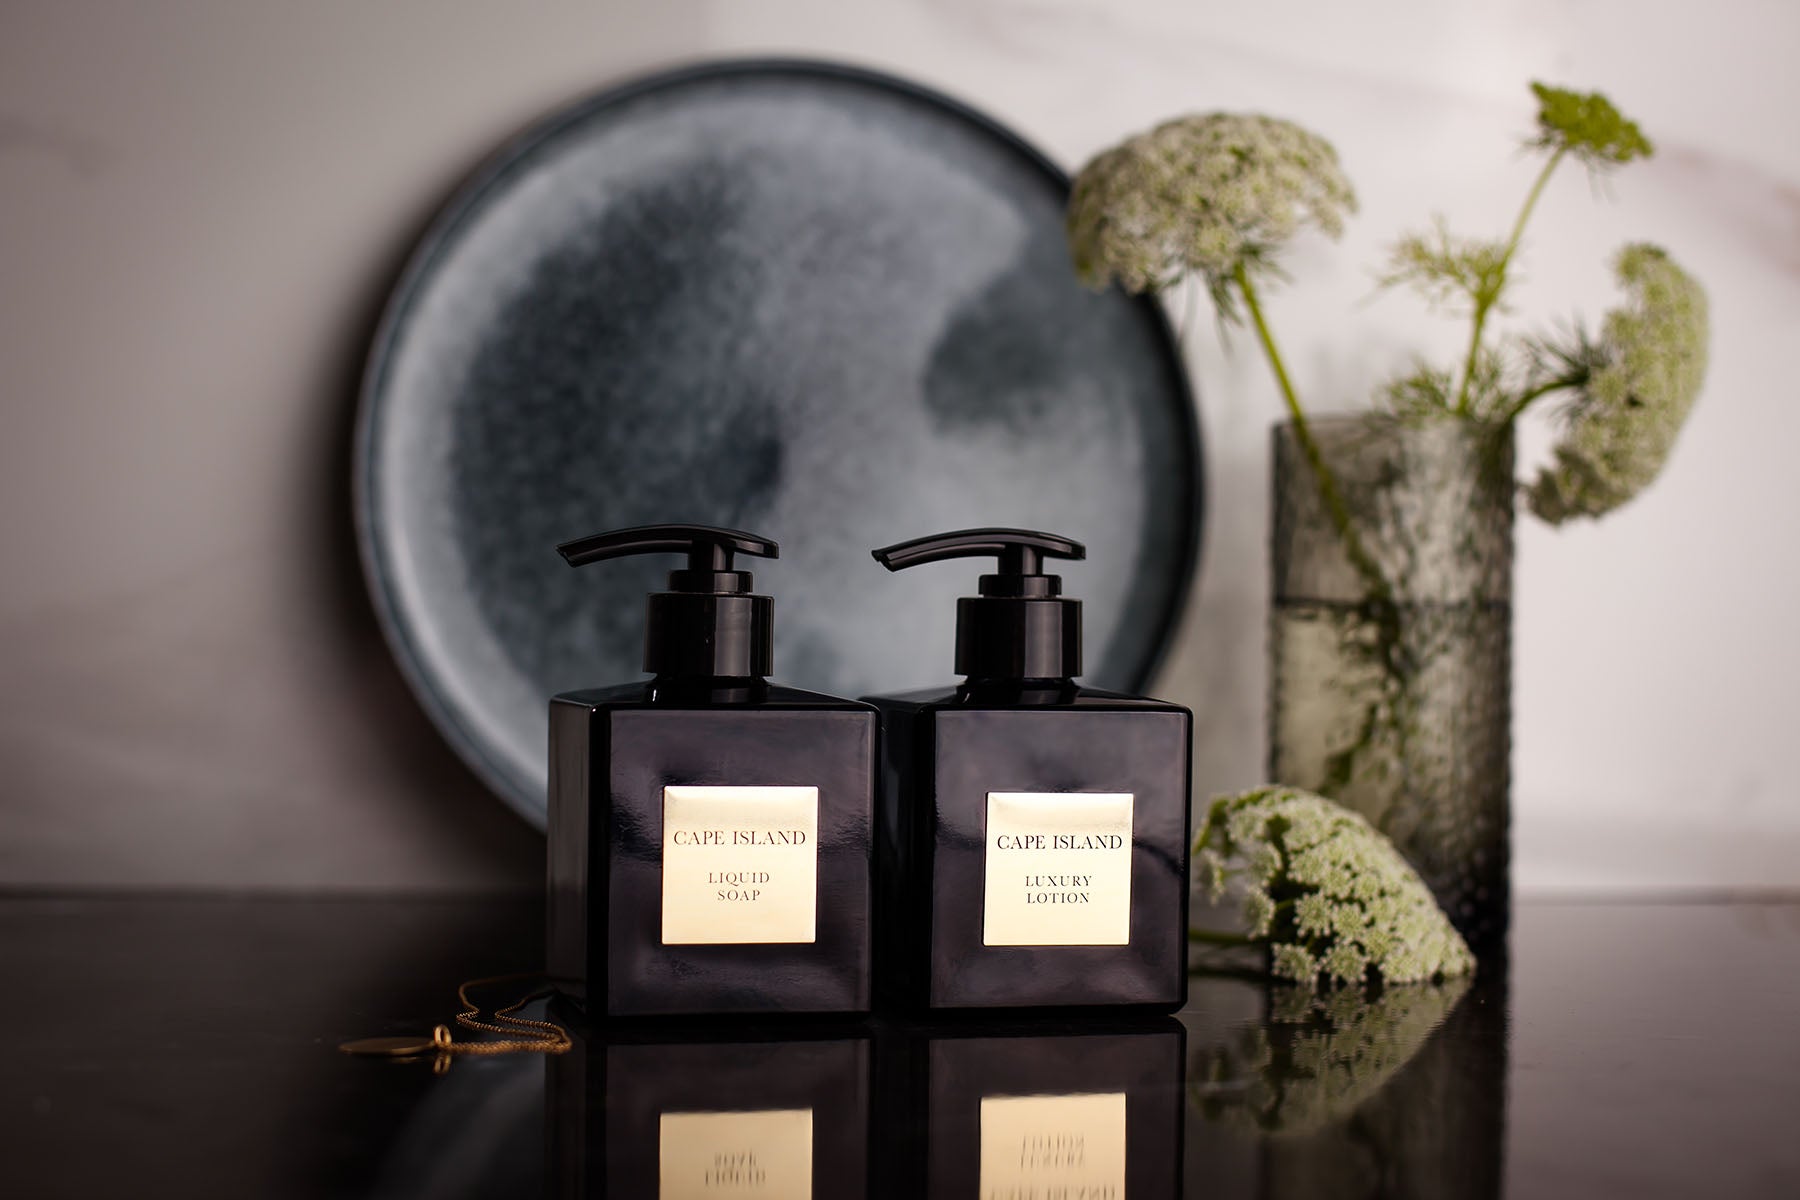 The Cape Island Black Gold fragrance diffuser. Cape Island luxury candles, soap products and home fragrances are available at Sarza home goods and furniture store in Rye New York.